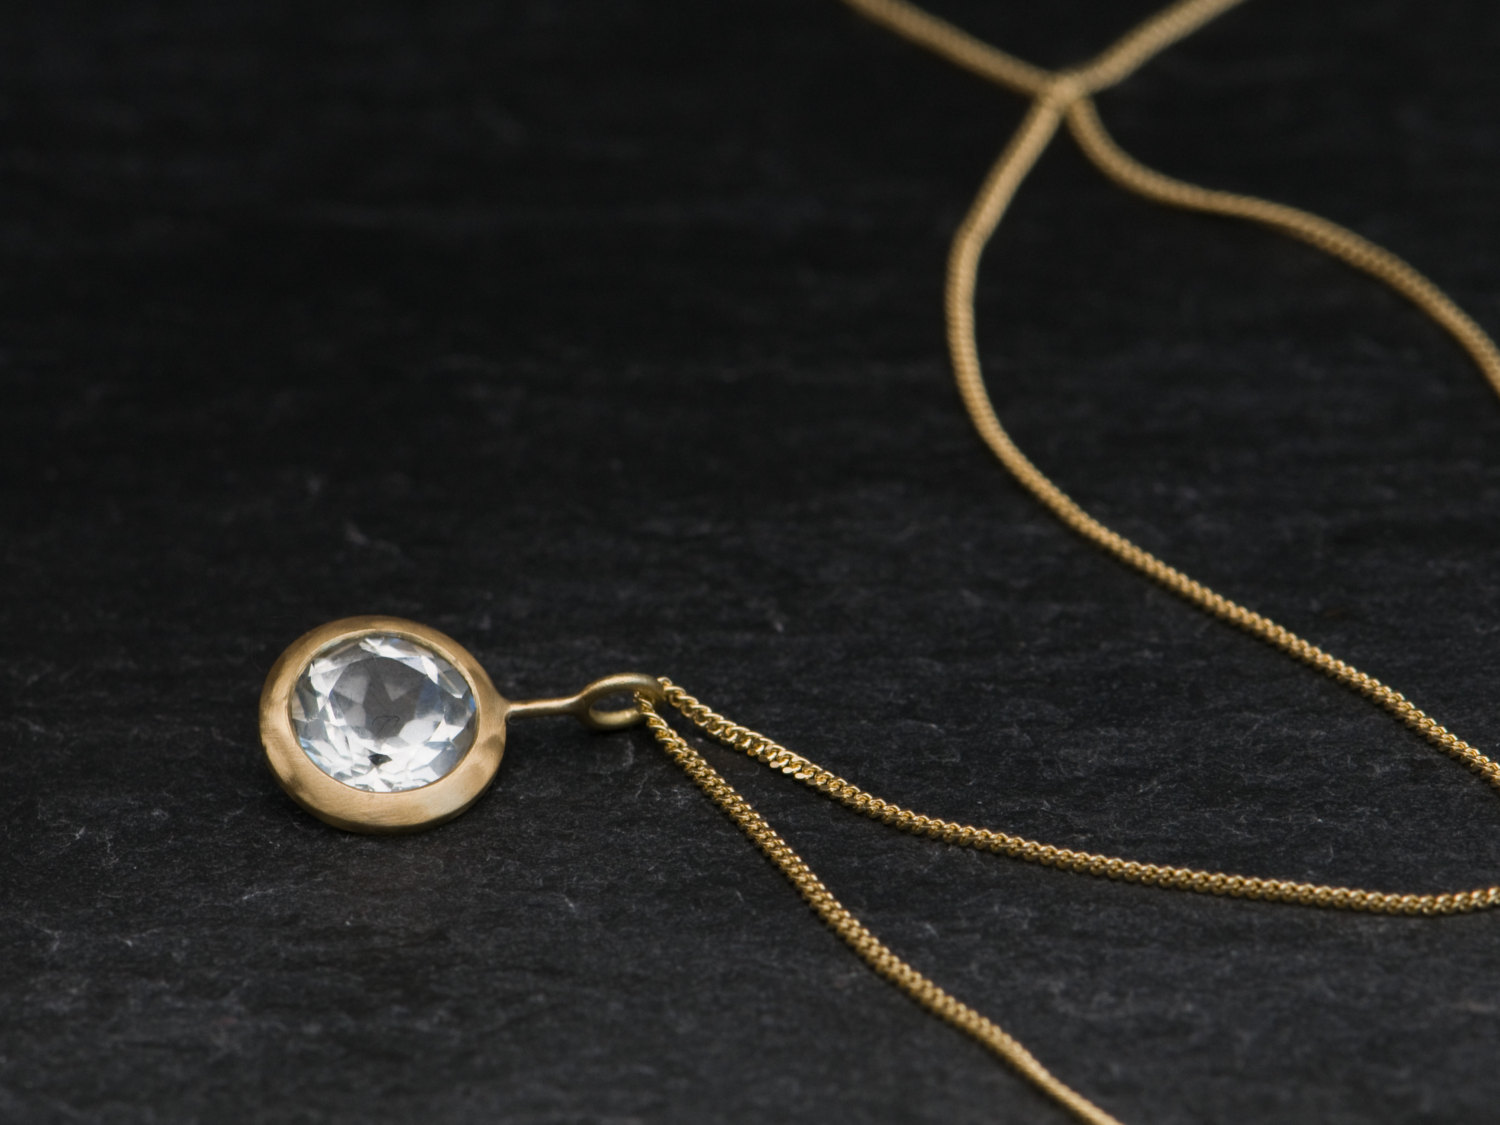 Clean and simple white topaz 'lollipop' necklace, set in 18k yellow gold - on an 18k yellow gold chain by William White